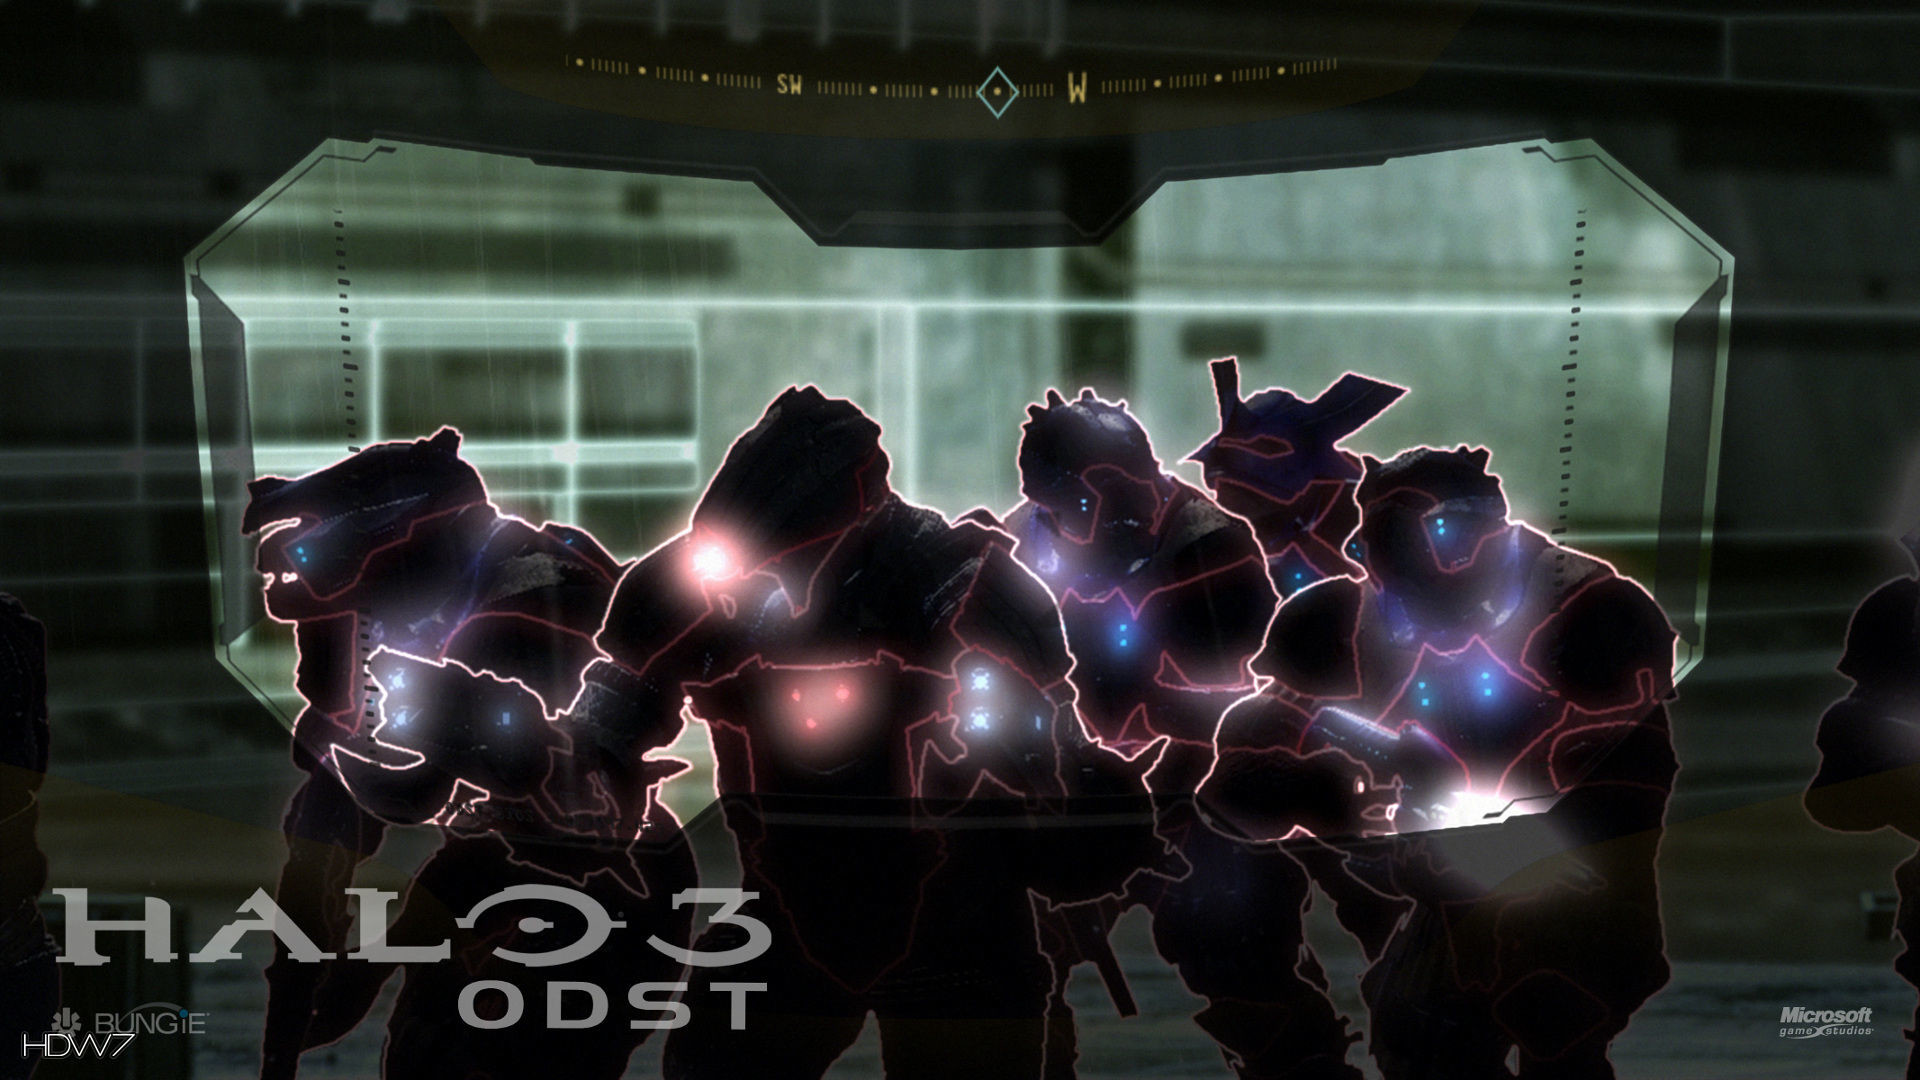 1920x1080 halo 3 odst brutes at night widescreen hd wallpaper